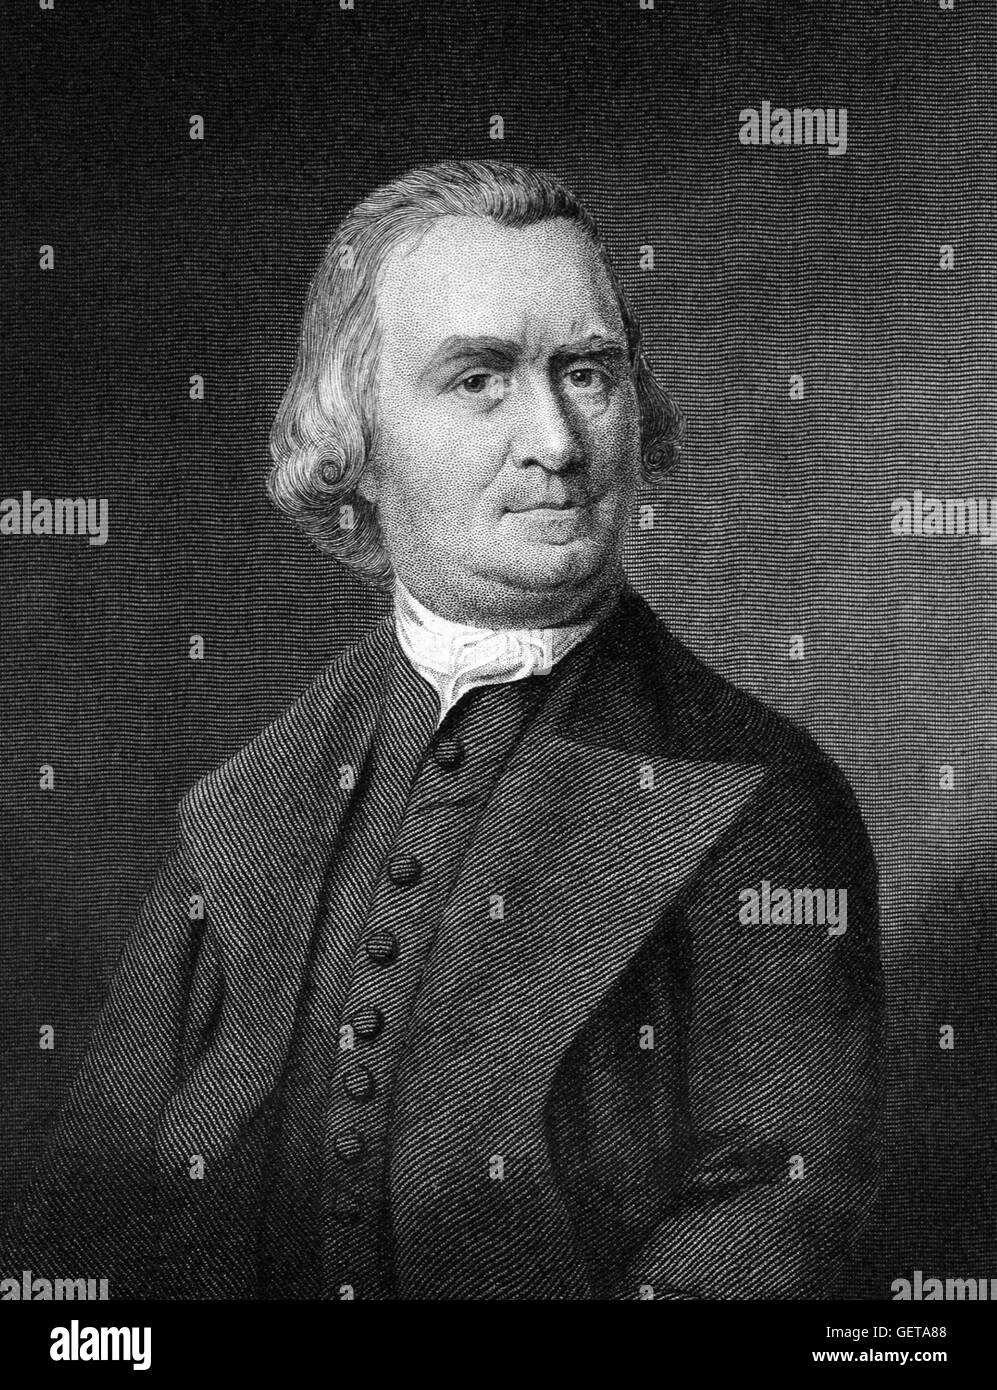 Samuel Adams (1722-1803), an American statesman, political philosopher, and one of the Founding Fathers of the United State. An 1839 engraving by G F Storm, after a drawing by James Barton Longacre, from a painting by John Singleton Copley. Stock Photo